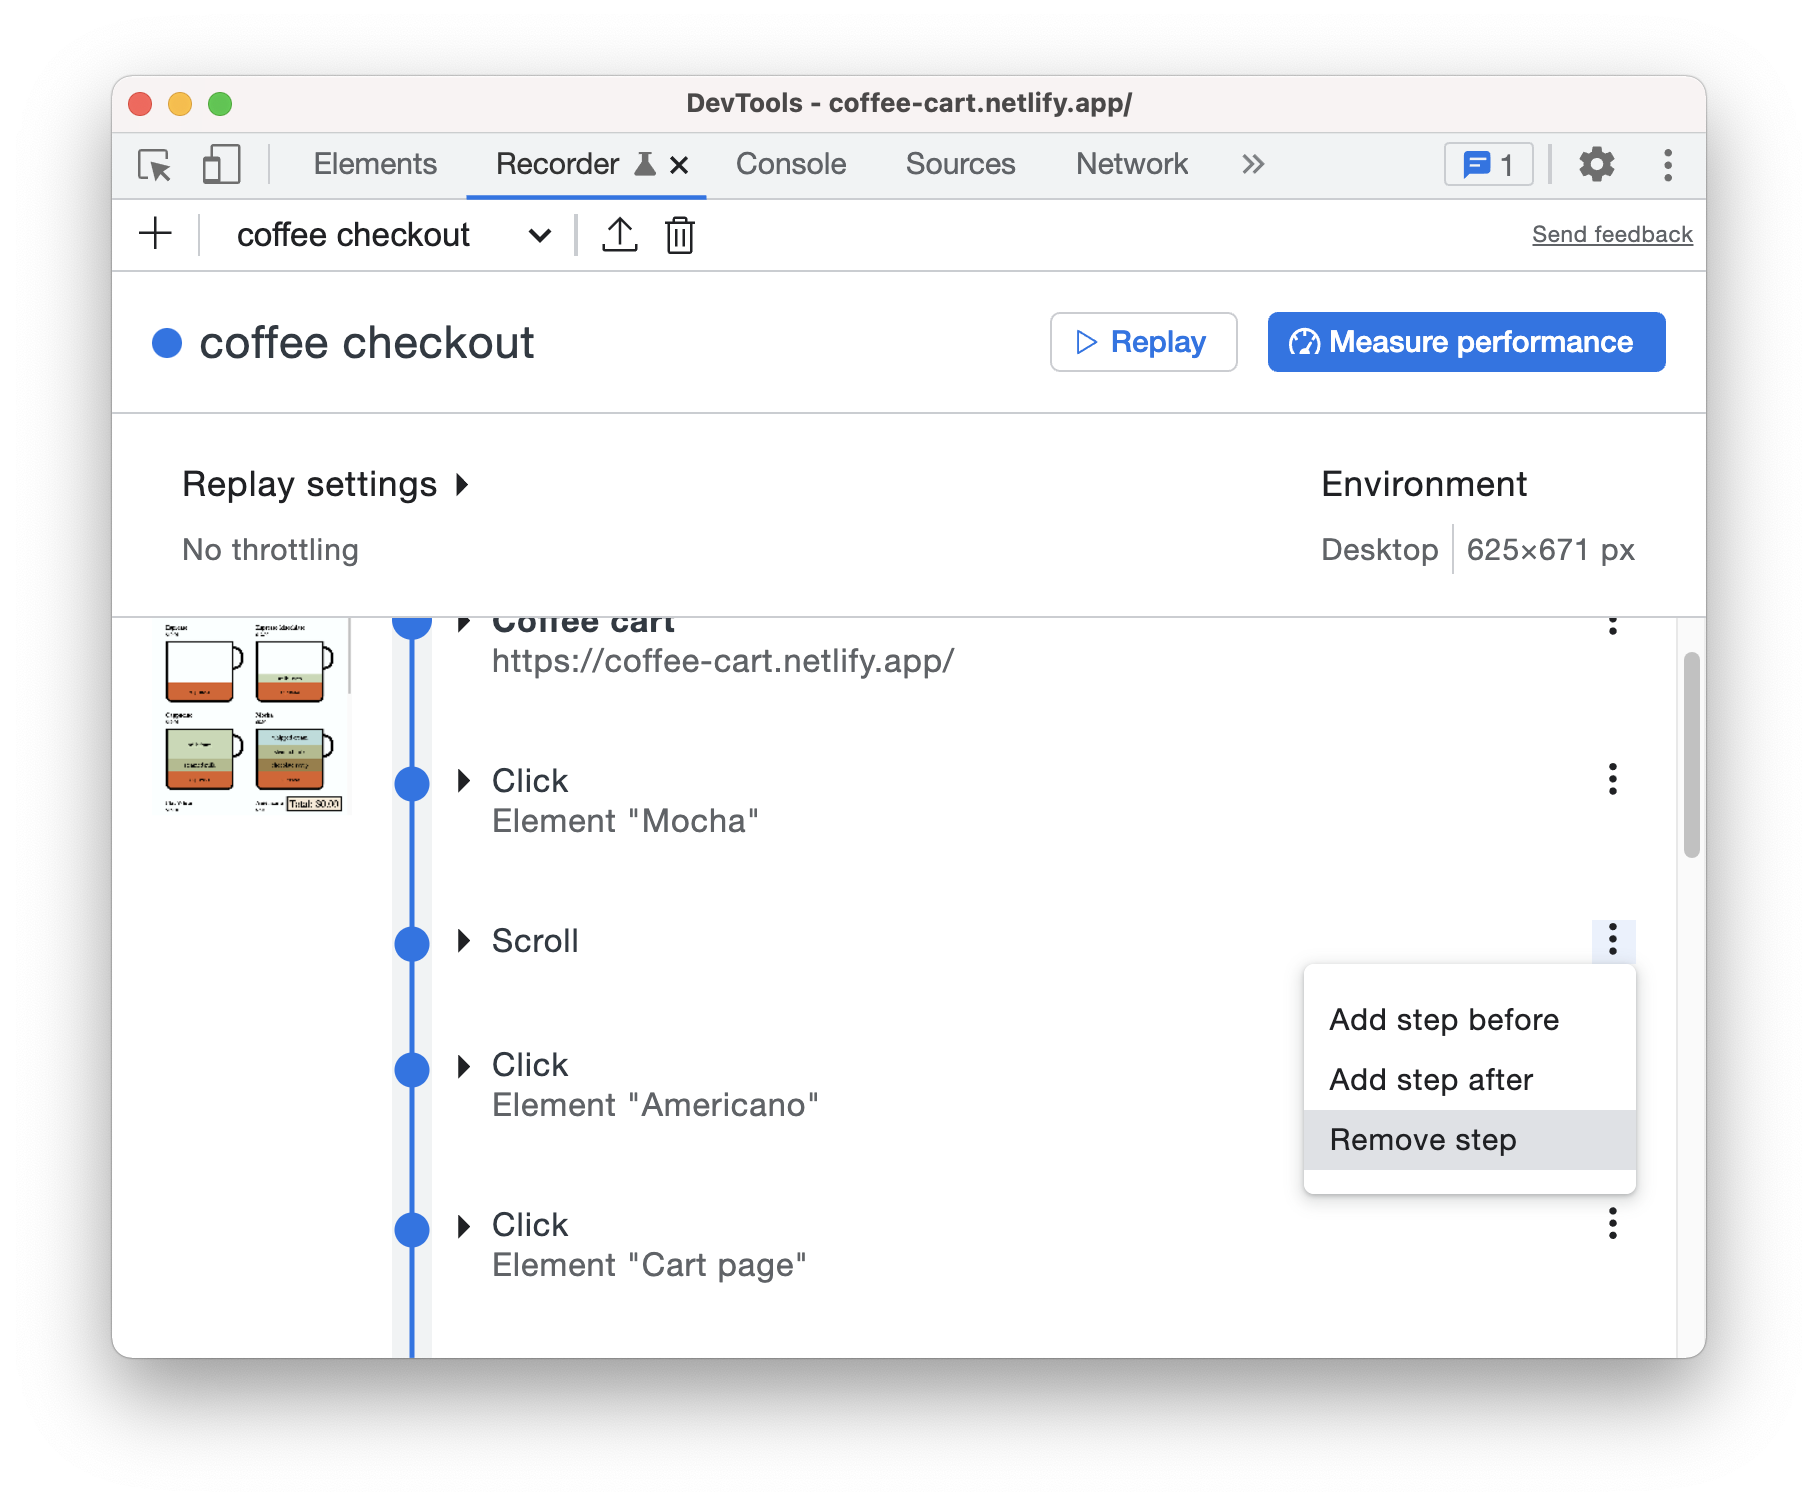 DevTools UI for coffee cart, including the menu for the Scroll event expanded to reveal three options: Add step before, add step after, and remove step.